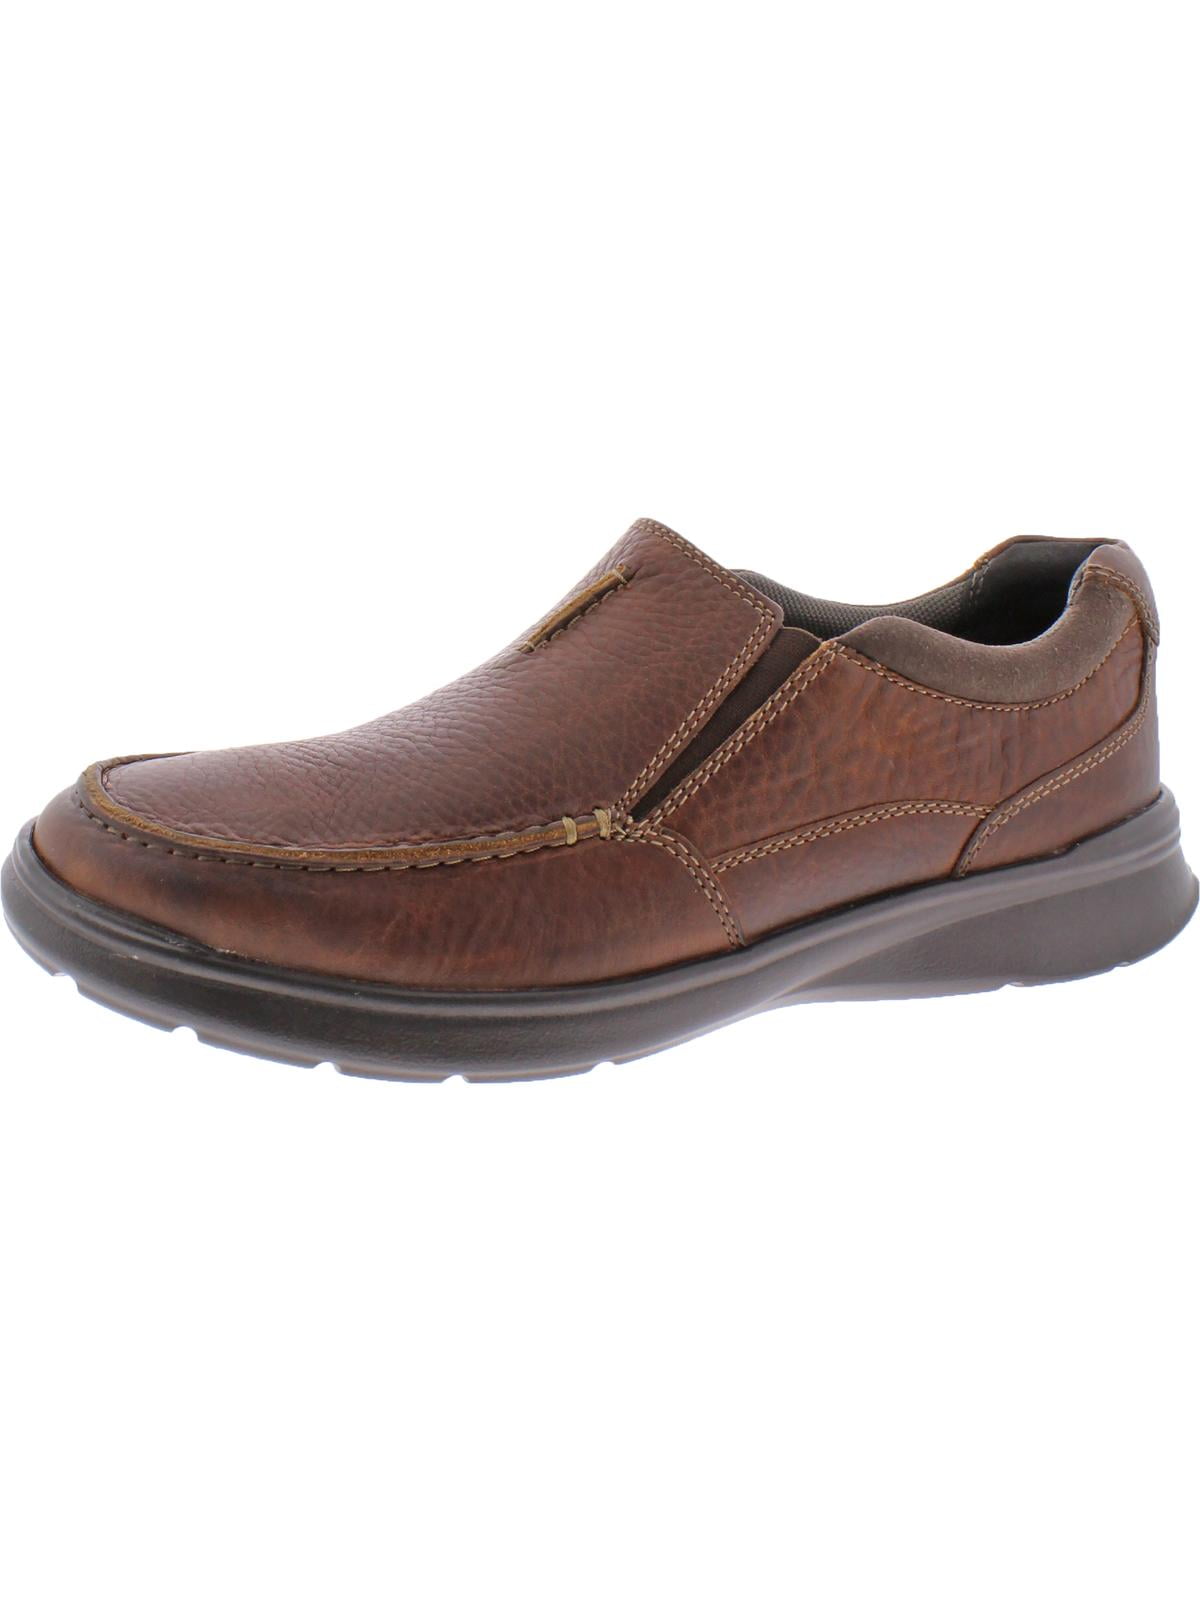 Size 11.5 Clarks Cotrell Free Slip On Casual Shoes Mens Brown Free Shipping